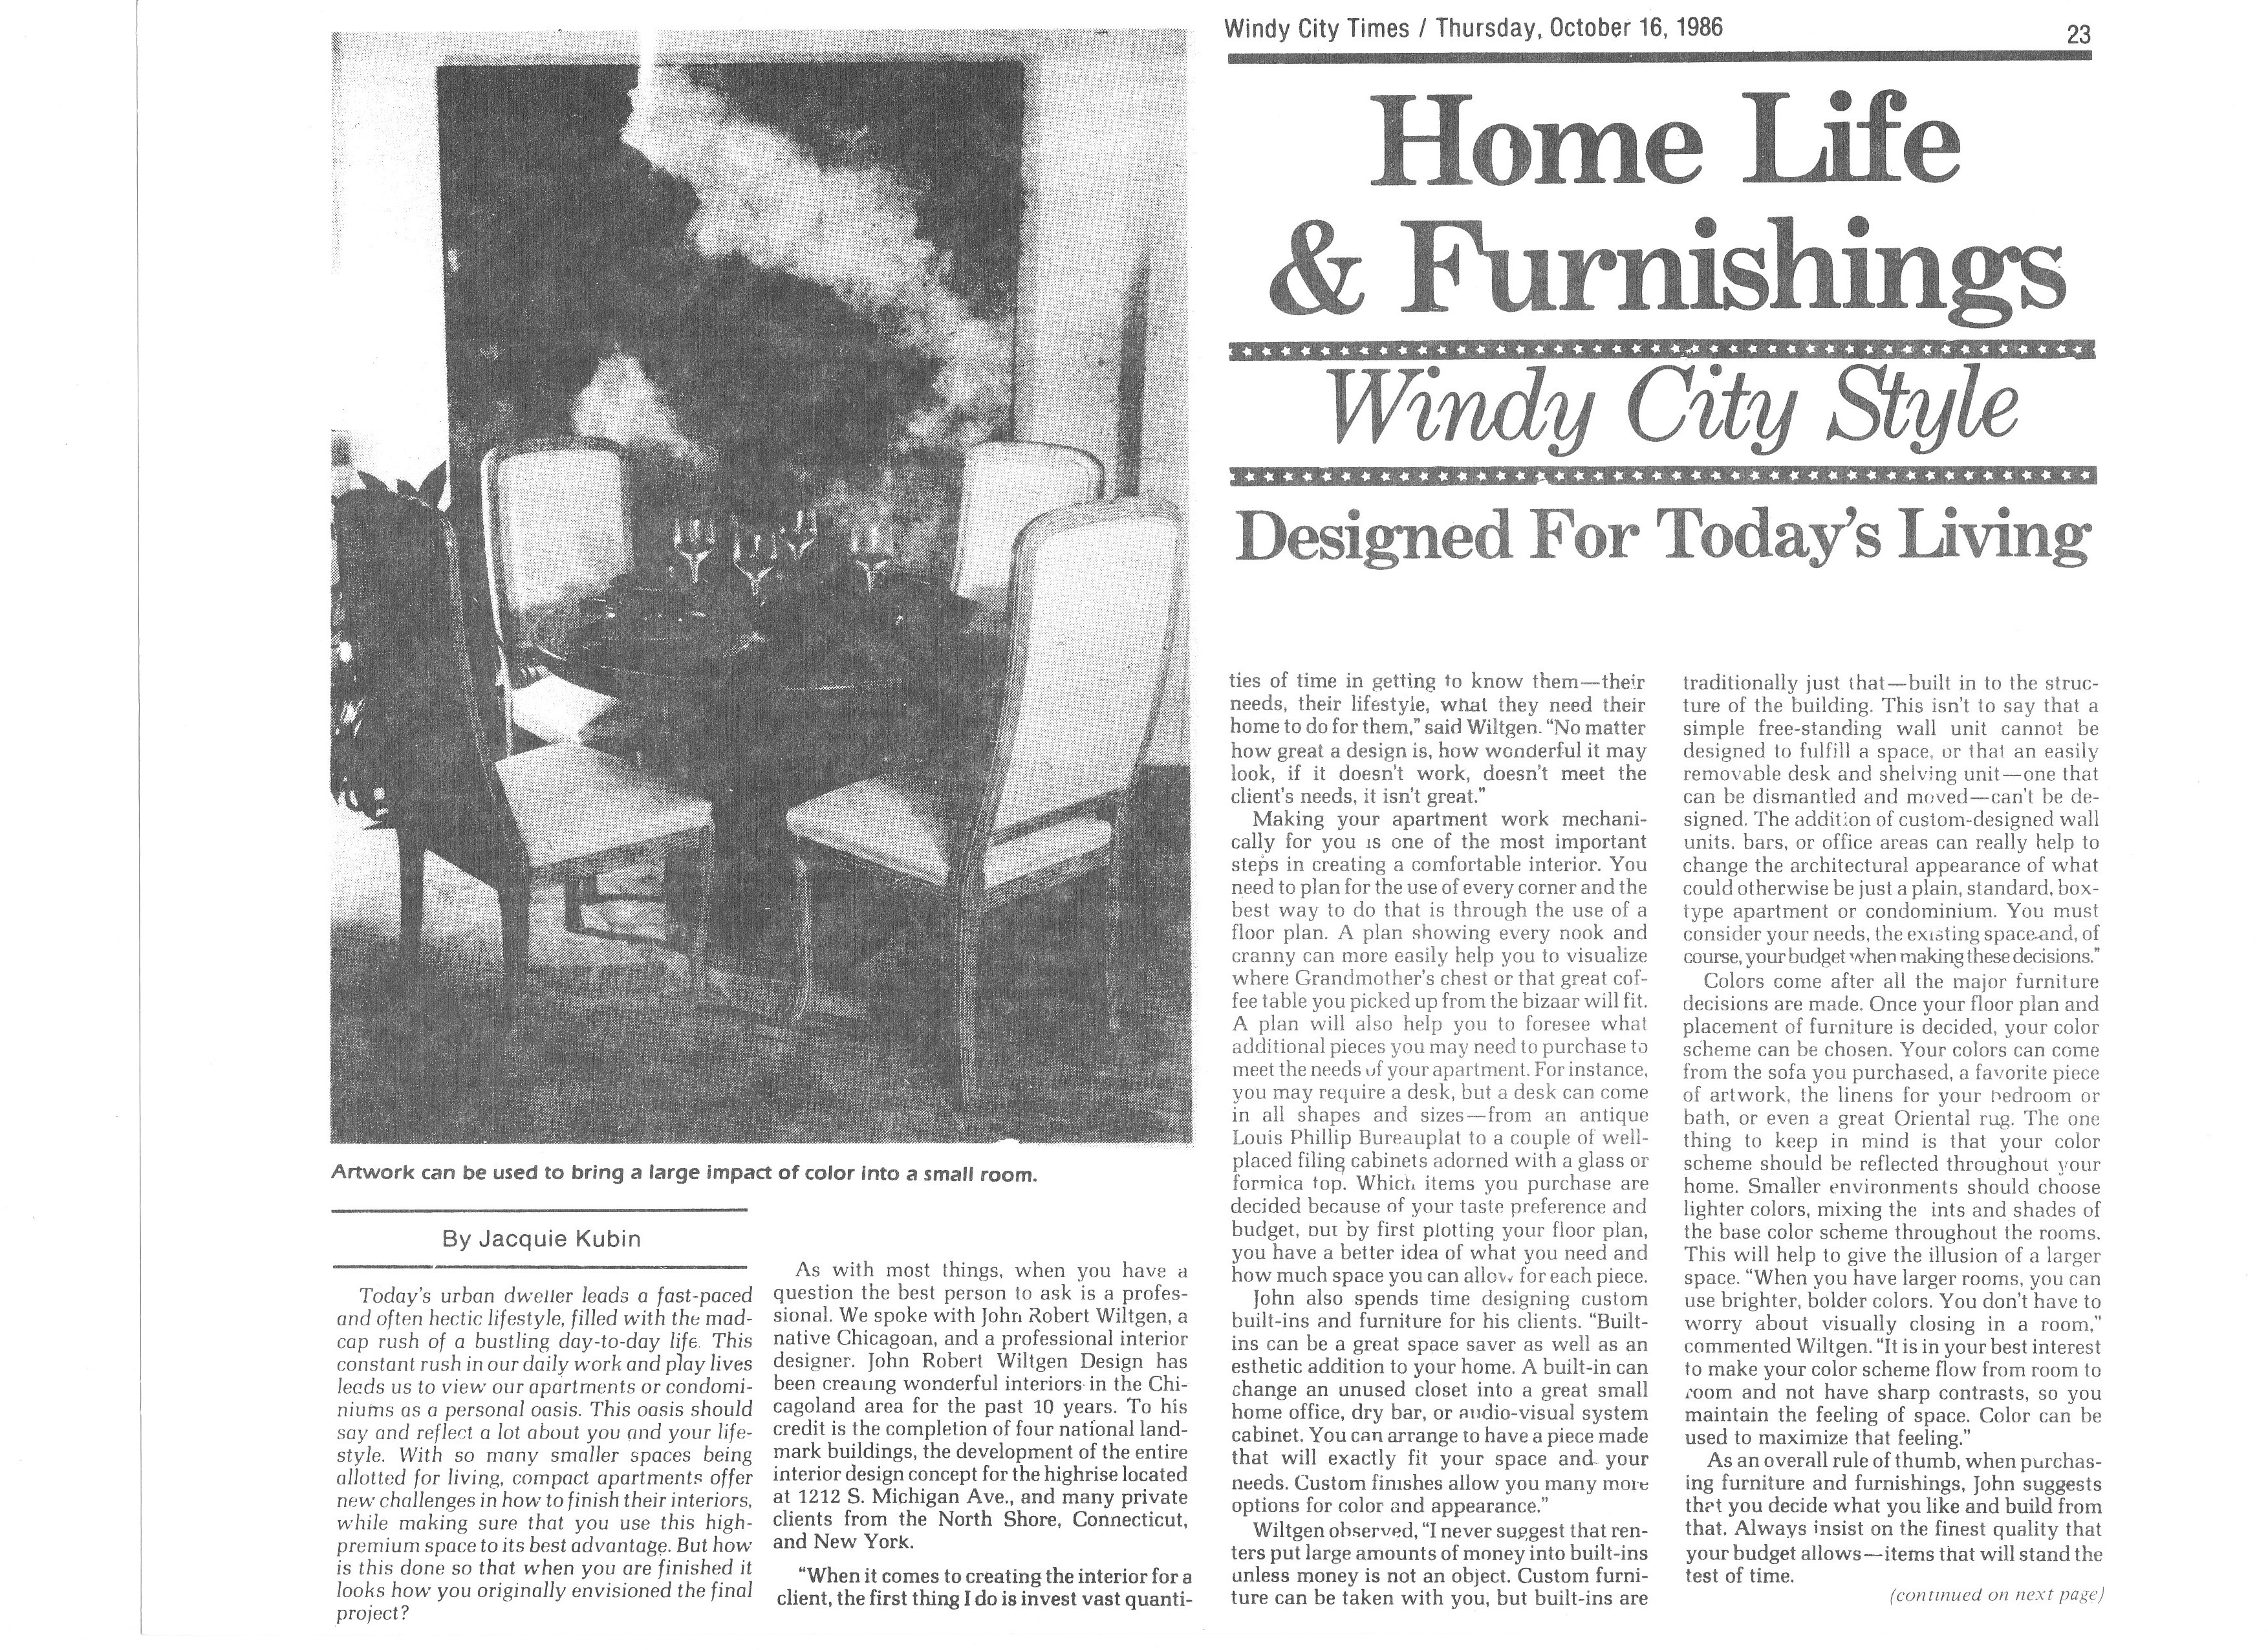 Home Life and Furnishings Designed for Today's Living (1)